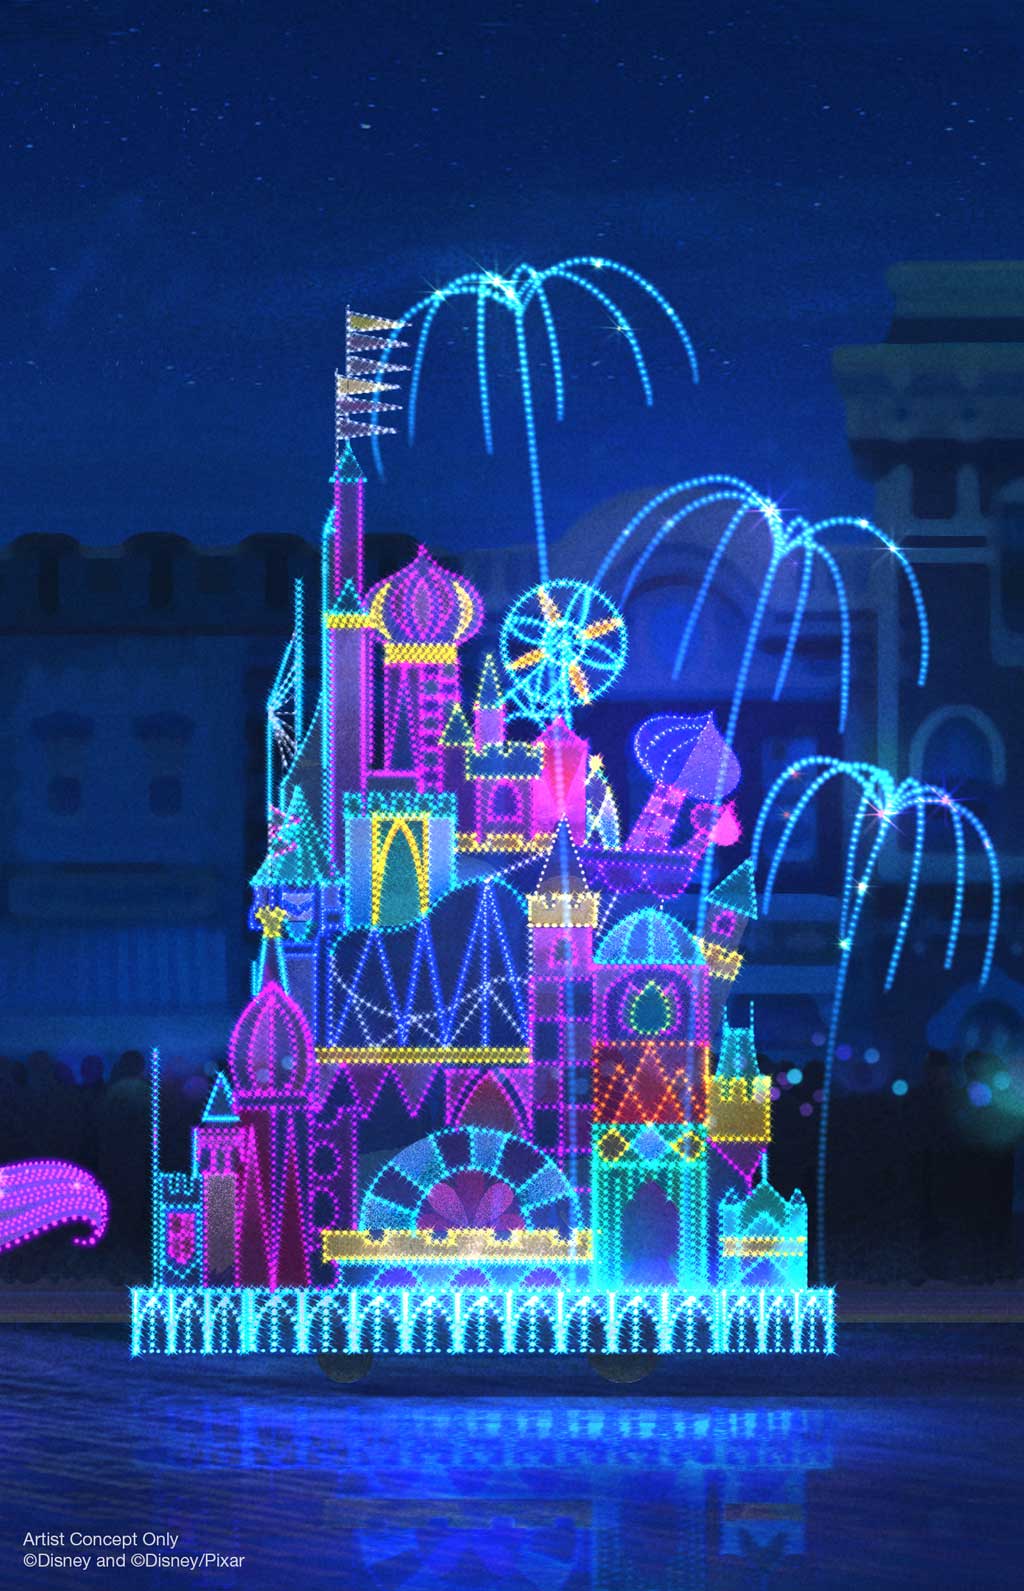 In honor of the 50th anniversary of the “Main Street Electrical Parade,” this nighttime spectacular will return to Disneyland Park, April 22, 2022. Inspired by the original design of the parade, plus Disney Legend Mary Blair’s iconic art style on “it’s a small world,” the new grand finale will bring together classic and contemporary favorites, led by the Blue Fairy from “Pinocchio.” Depicted here on one side of the parade route, guests may see moments from (l-r), “Hercules,” “Coco,” “Moana,” “Pocahontas,” “Raya and the Last Dragon,” and “Aladdin.” On the opposite side, (l-r), guests may enjoy sights of “Brave,” “The Princess and the Frog,” “Mulan,” “Frozen,” “The Jungle Book,” and “Encanto.” It will all come to a dazzling conclusion with a colorful, whimsical version of Sleeping Beauty Castle. These stories will be interpreted in thousands of sparkling lights and electro-synthe-magnetic musical sound, with unique representations of beloved characters as animated dolls. (Artist Concept/Disneyland Resort)